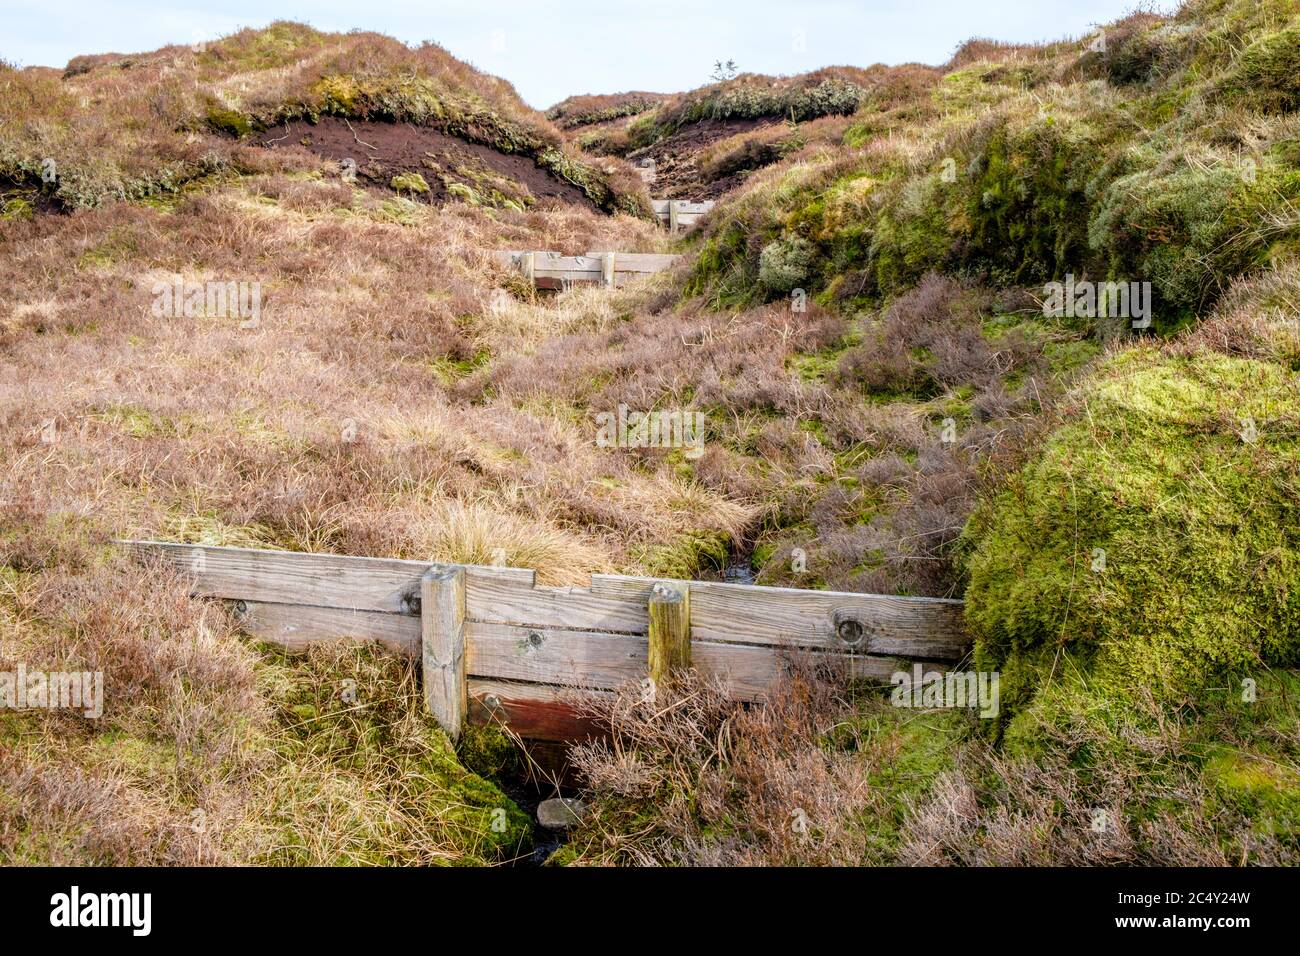 Gully blocking using wooden dams preventing erosion of the moor. Part of the moorland restoration work on Kinder Scout, Derbyshire, UK Stock Photo